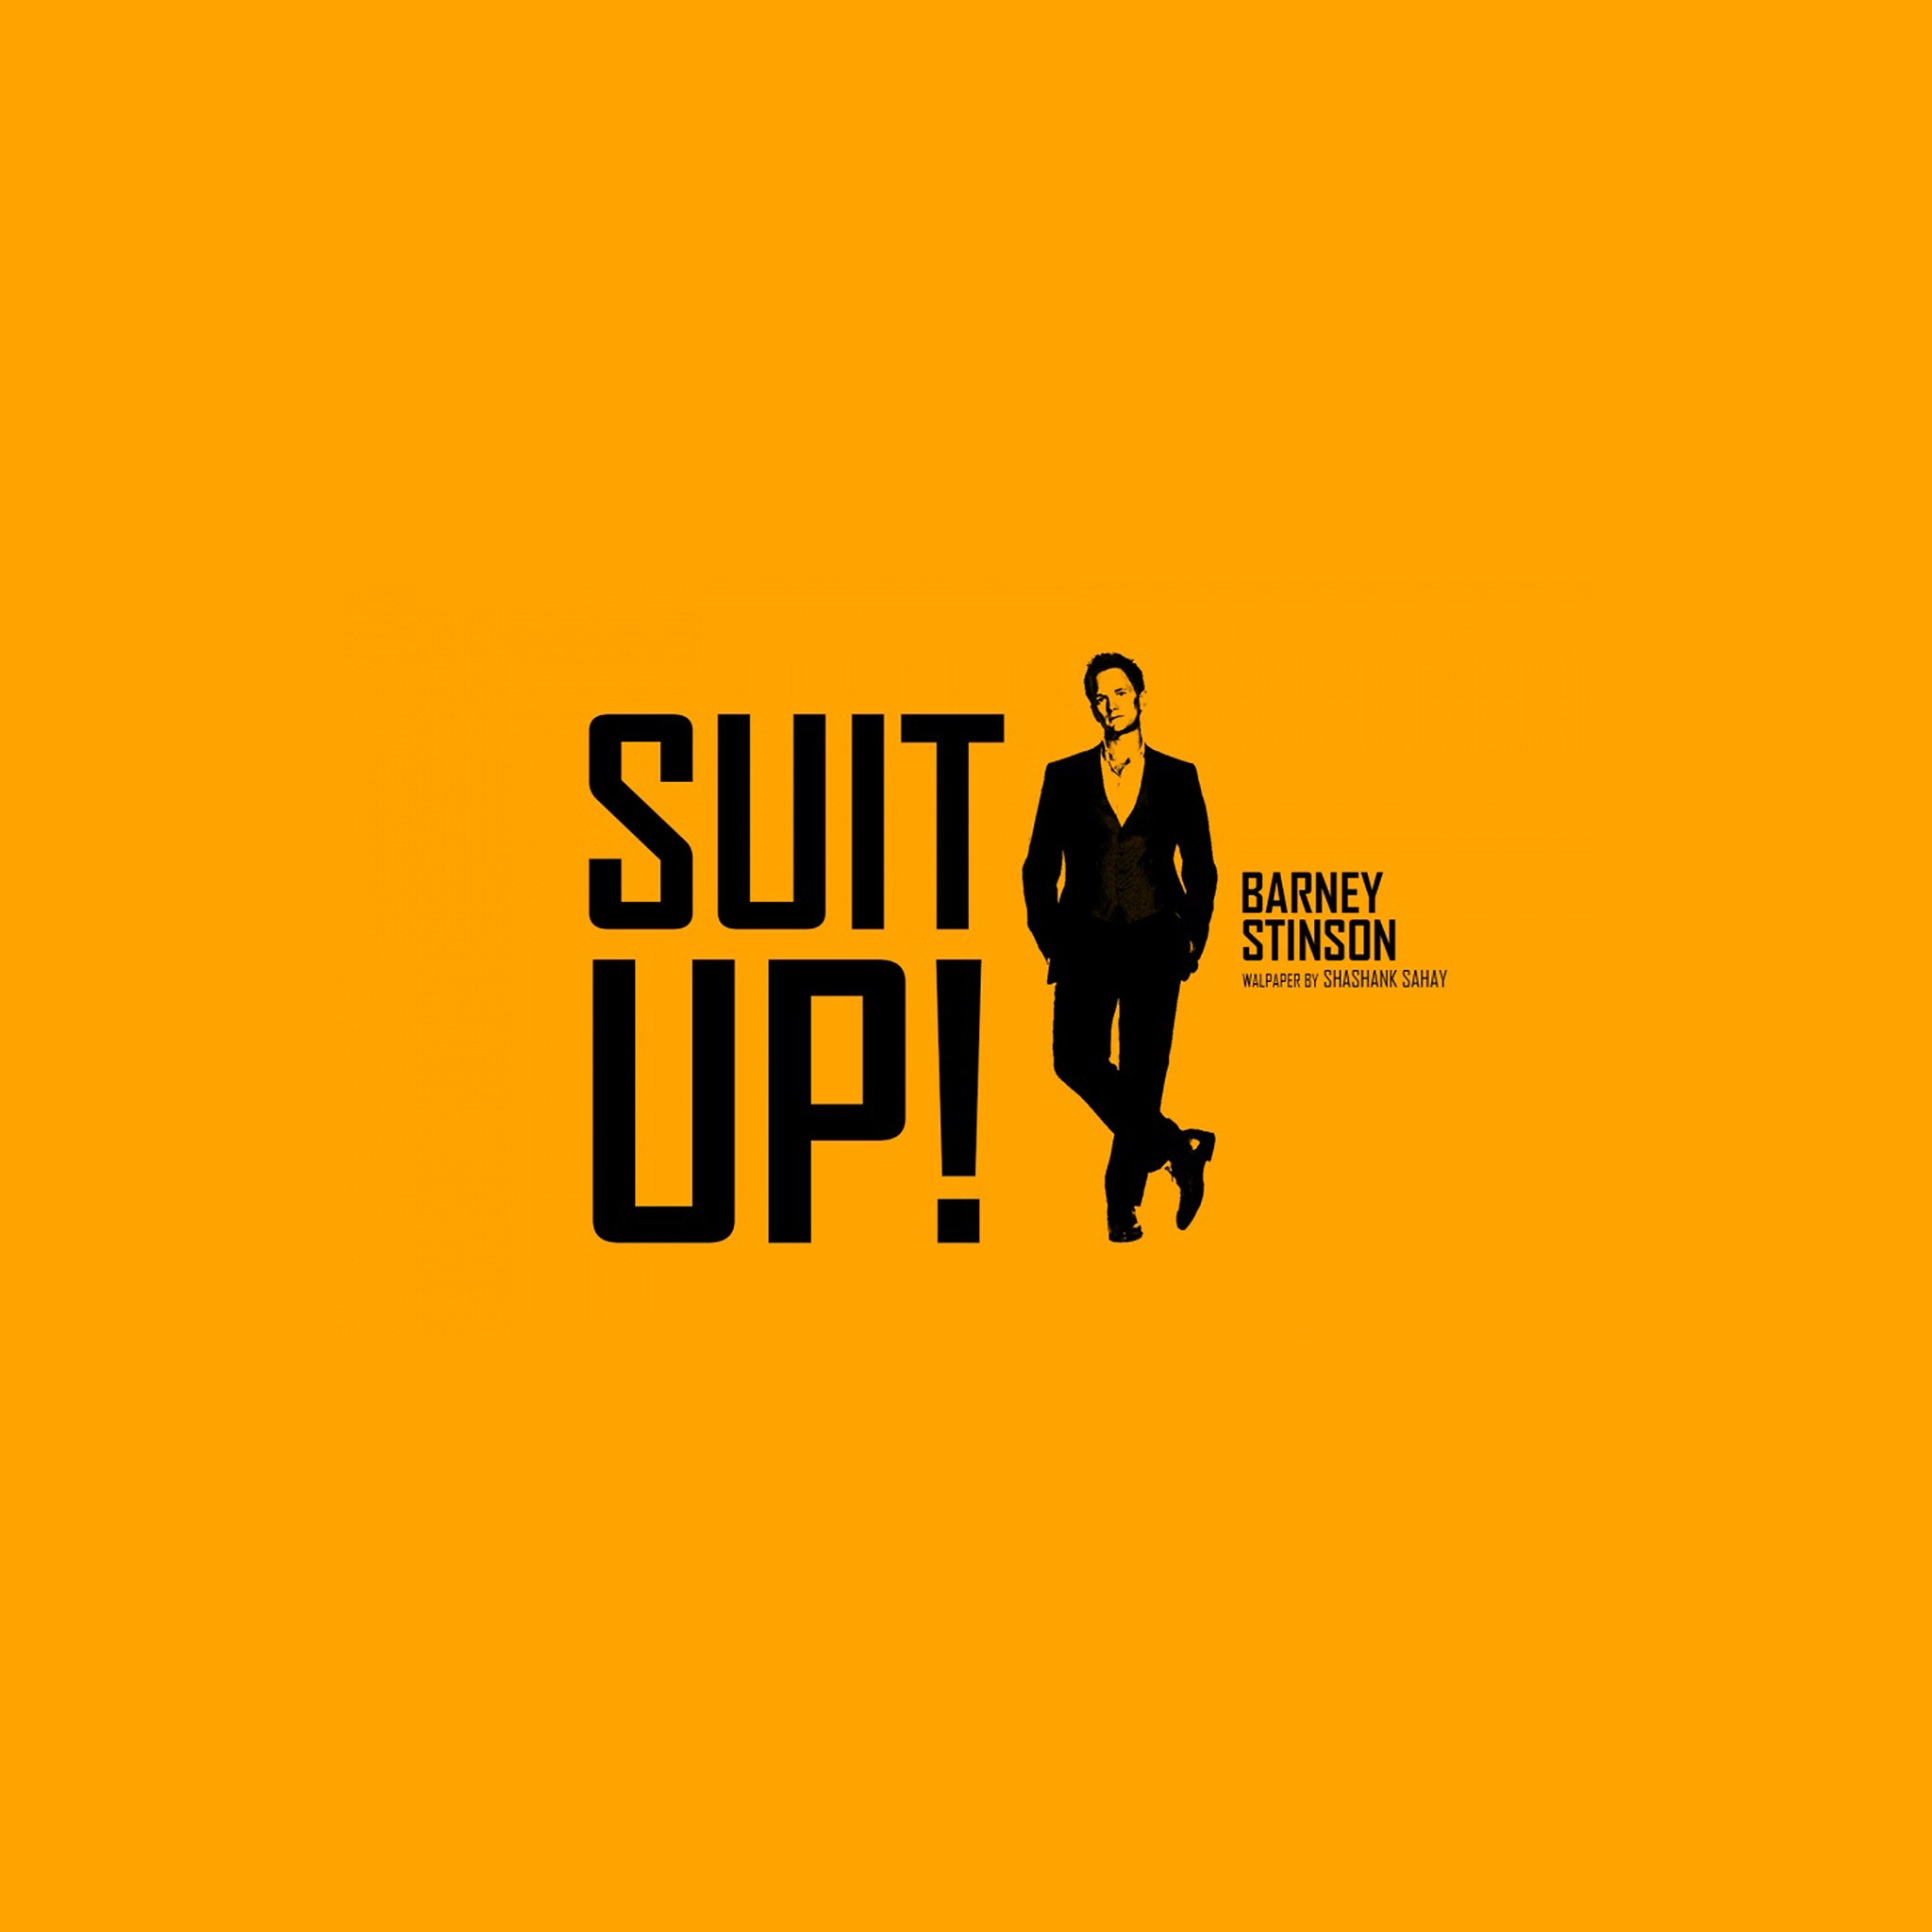 2048x2048 Nice wallpaper illustrating Barney Stinson of the popular sitcom "How I Met  Your Mother"